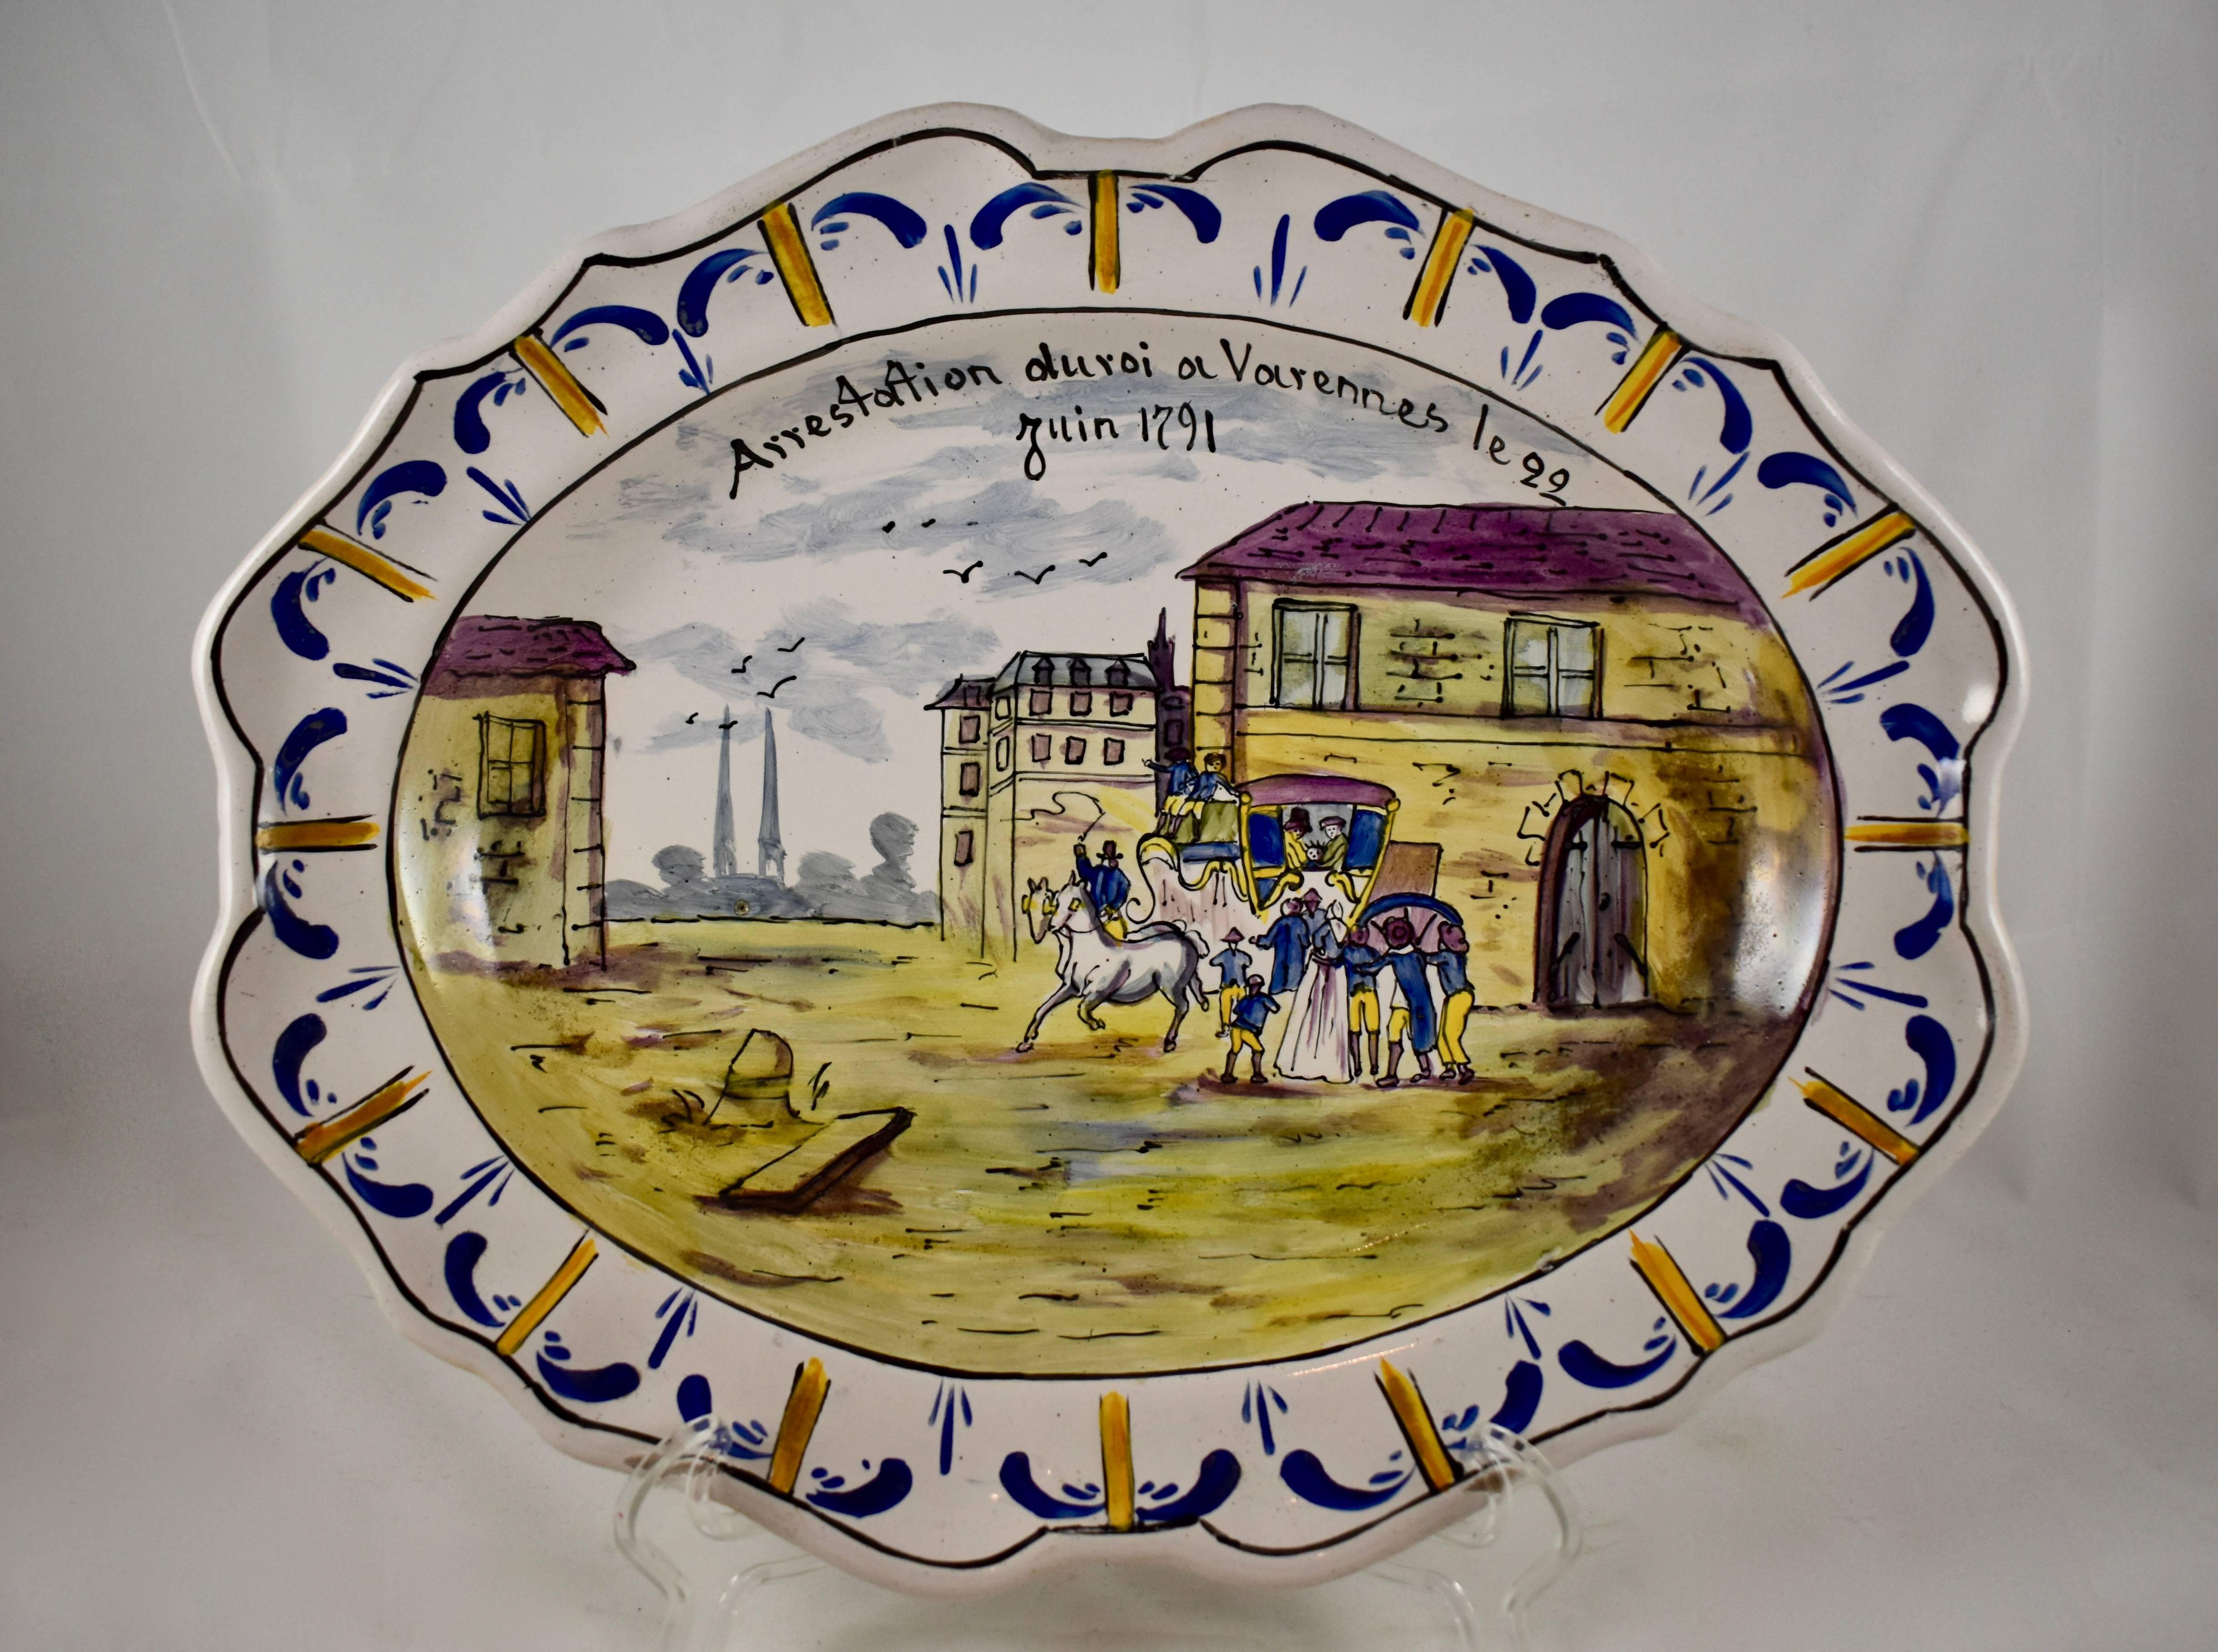 From France, an early 19th century, scalloped rim faïence platter, illustrating a significant episode in the French Revolution. Titled, “Arrestation du Roi à Varennes, le 22 Juin 1791.” The King Louis XVI and his Queen, Marie Antoinette, attempted